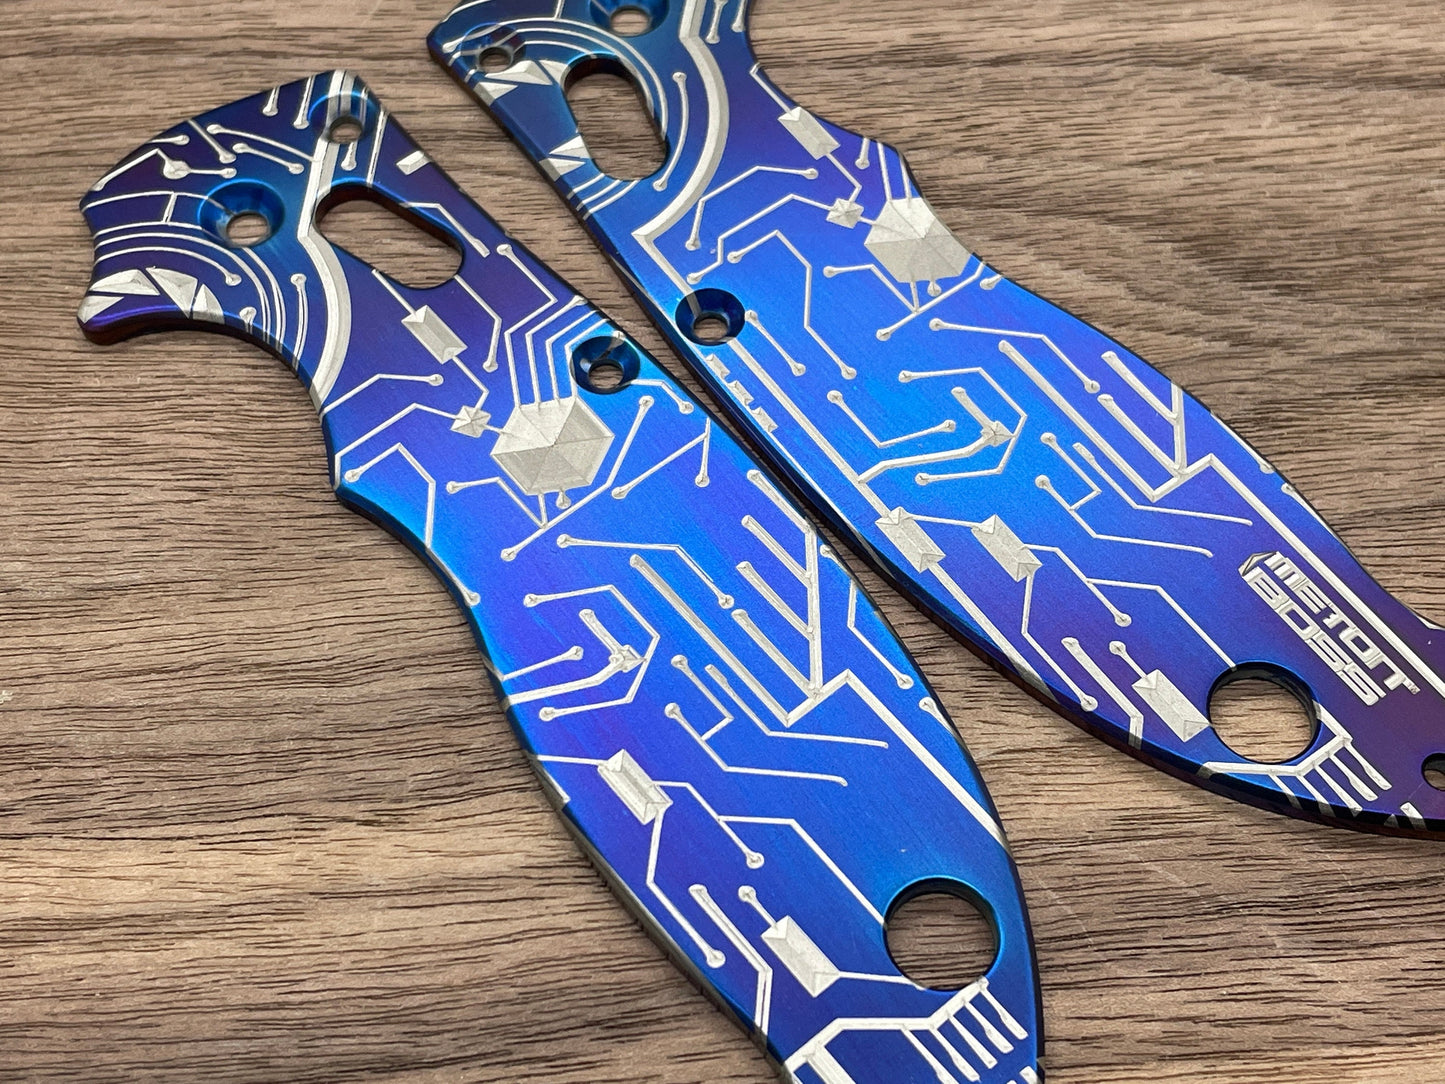 Flamed CIRCUIT Board engraved Titanium scales for Spyderco MANIX 2